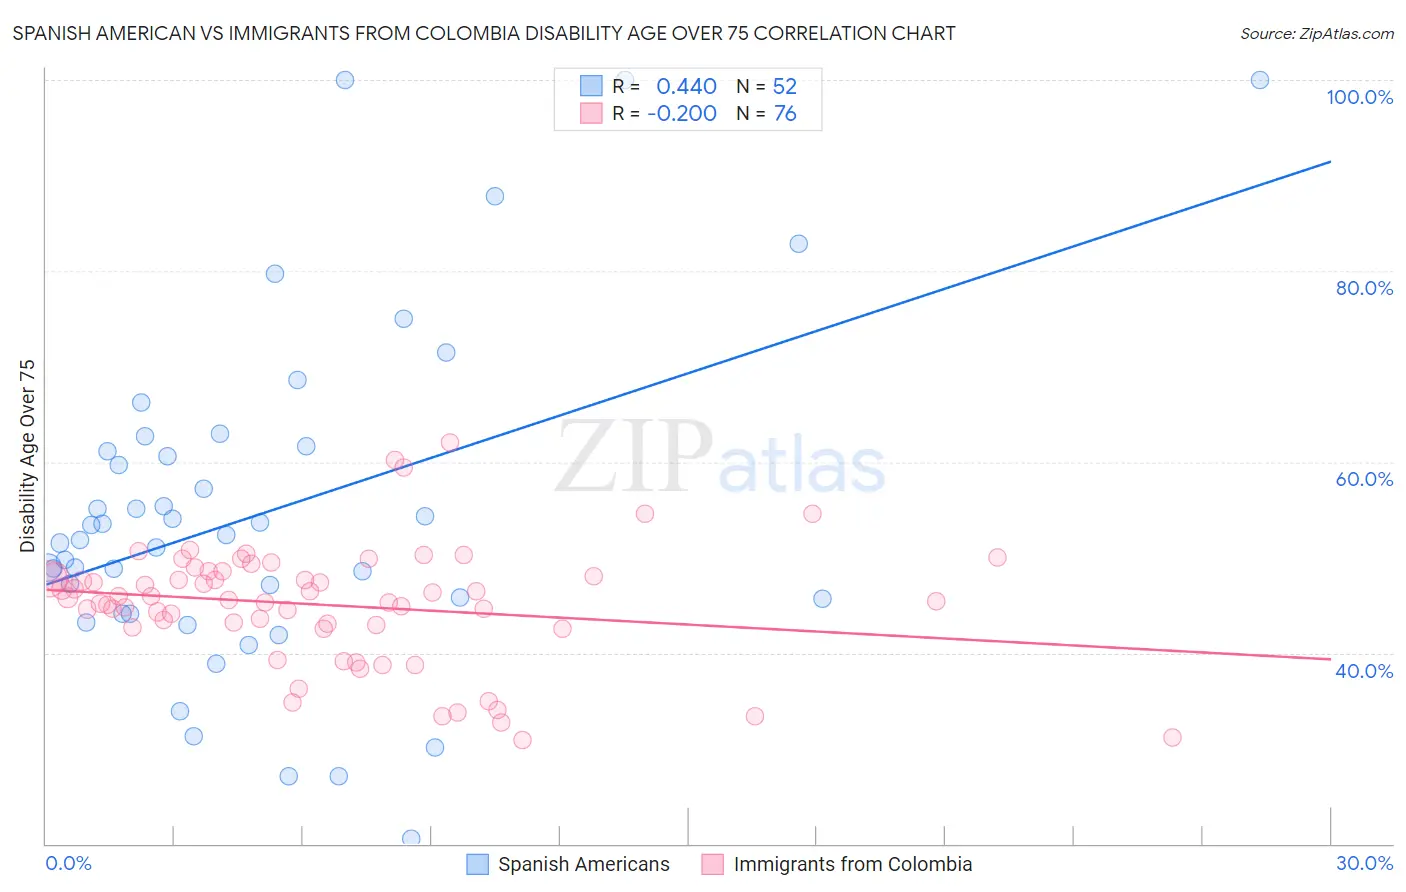 Spanish American vs Immigrants from Colombia Disability Age Over 75